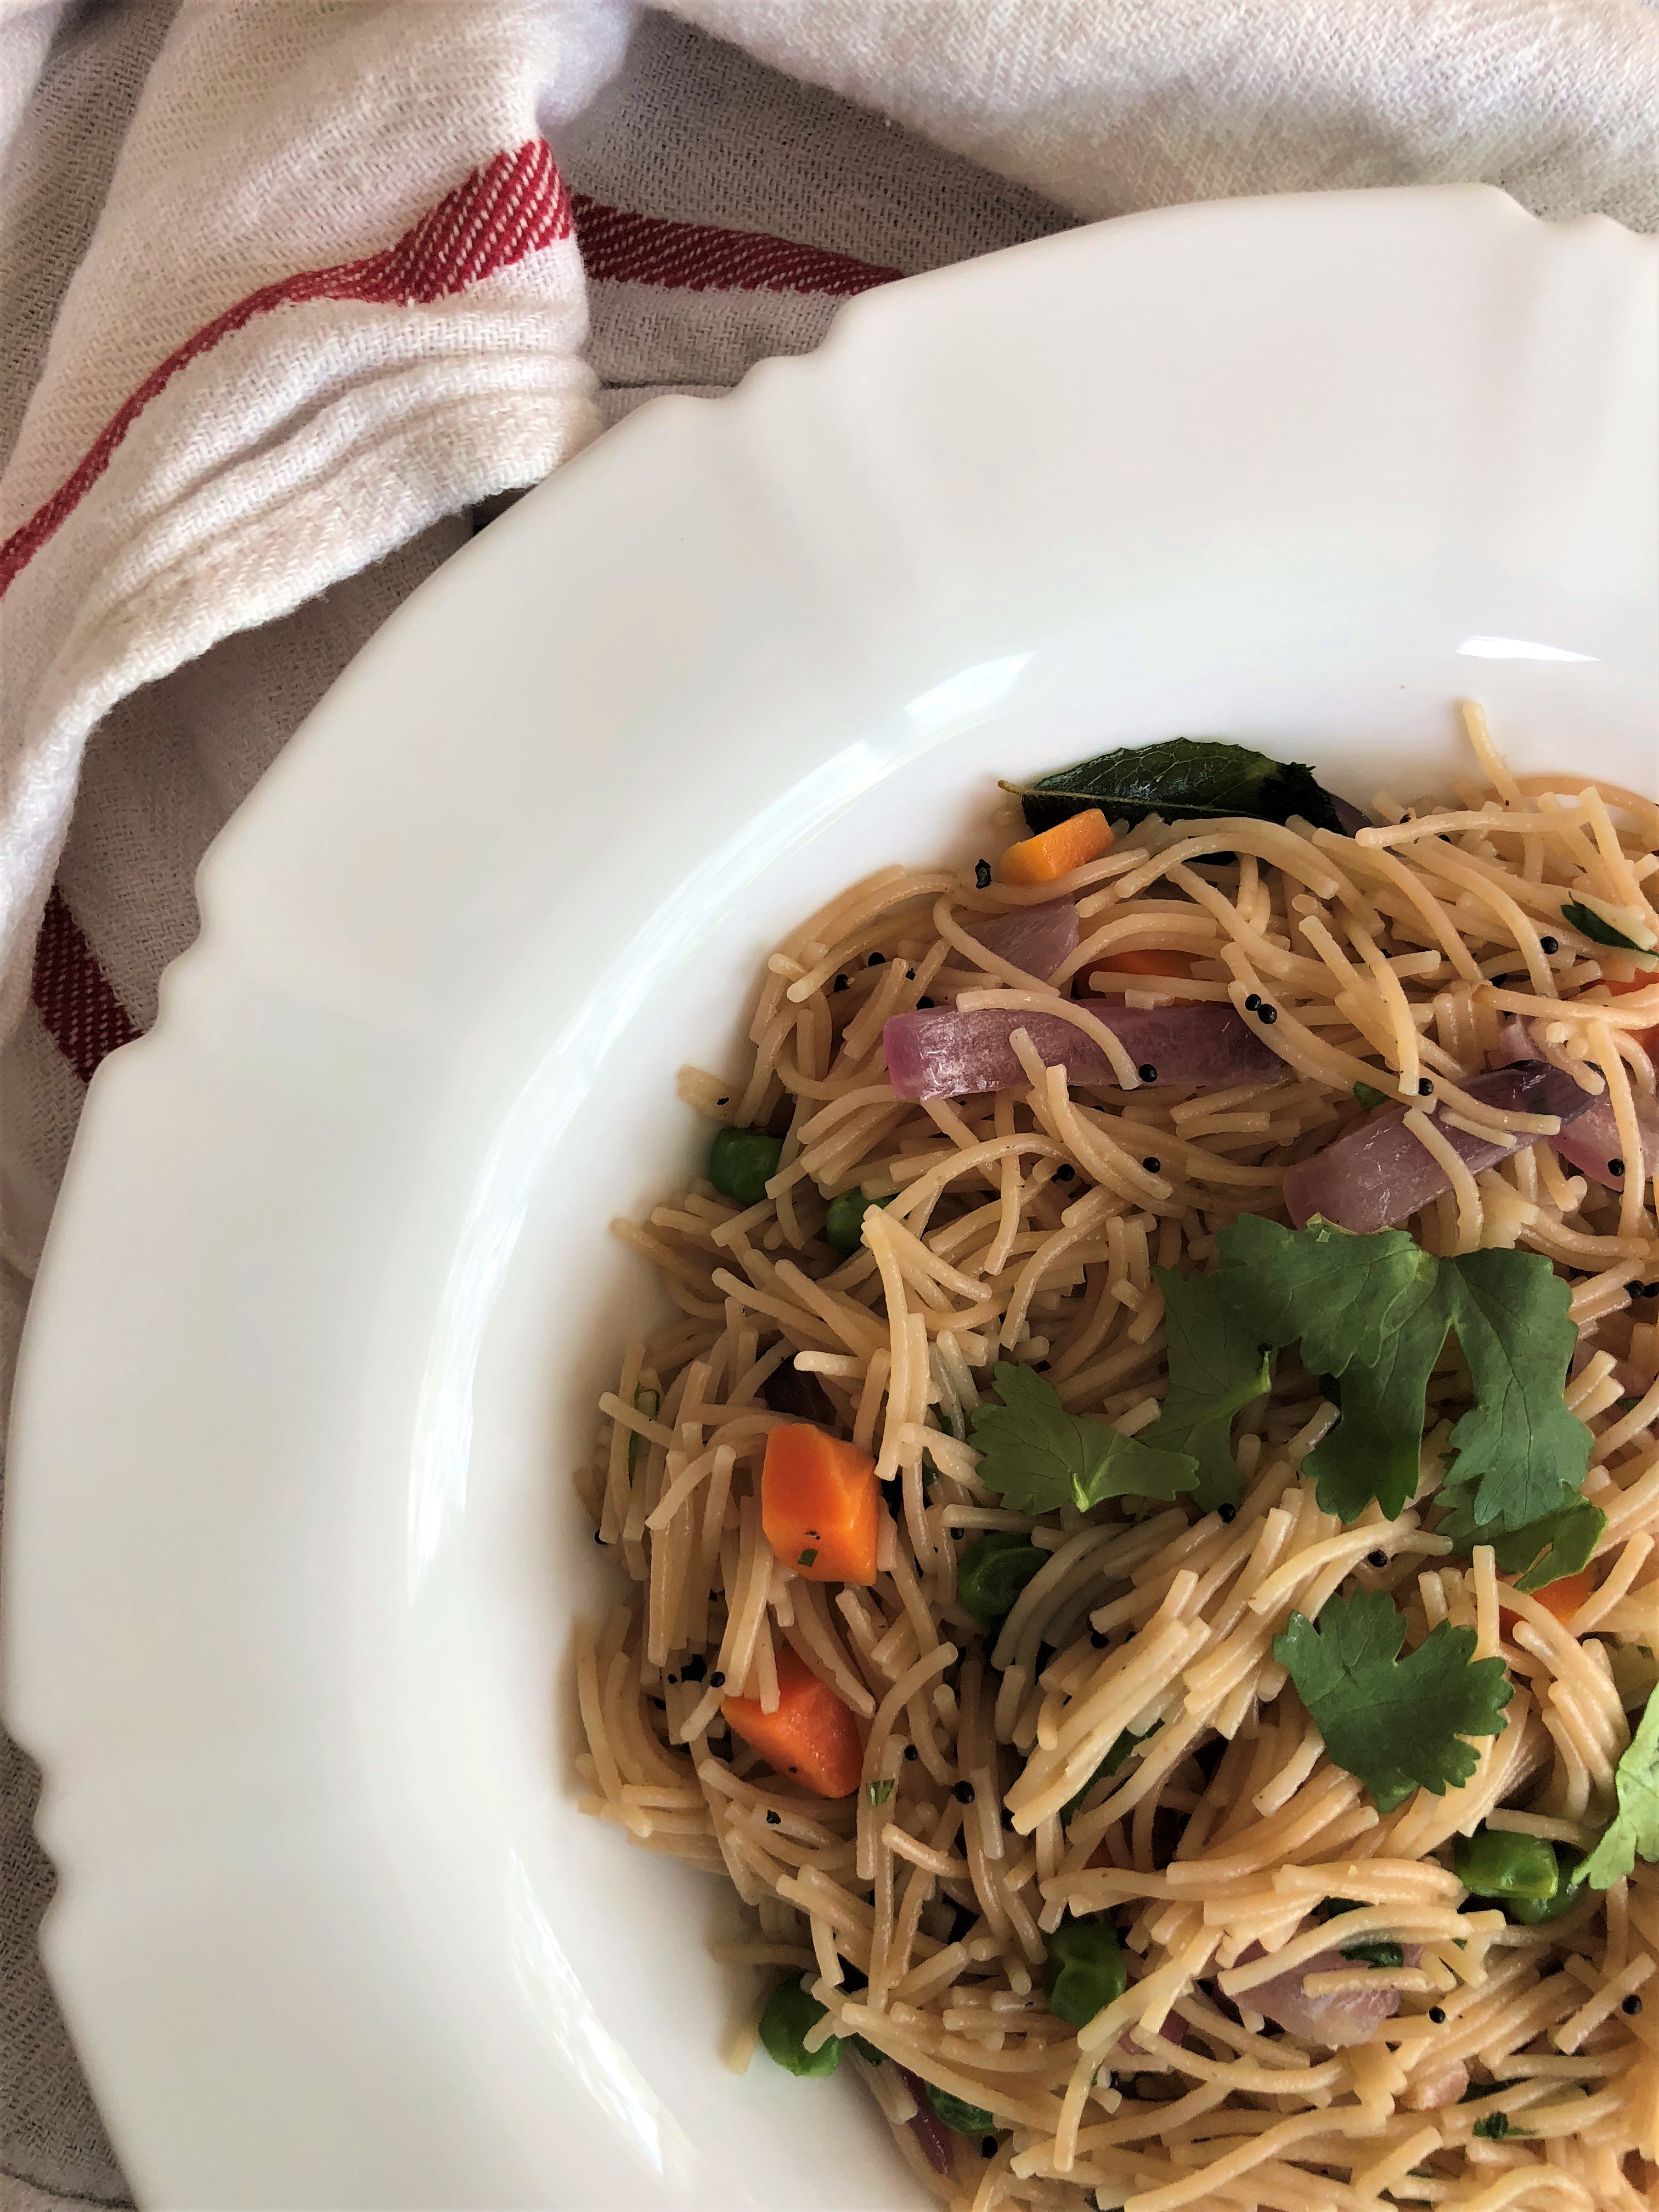 Namkeen Sewiyan or savory whole wheat vermicelli with carrots and peas